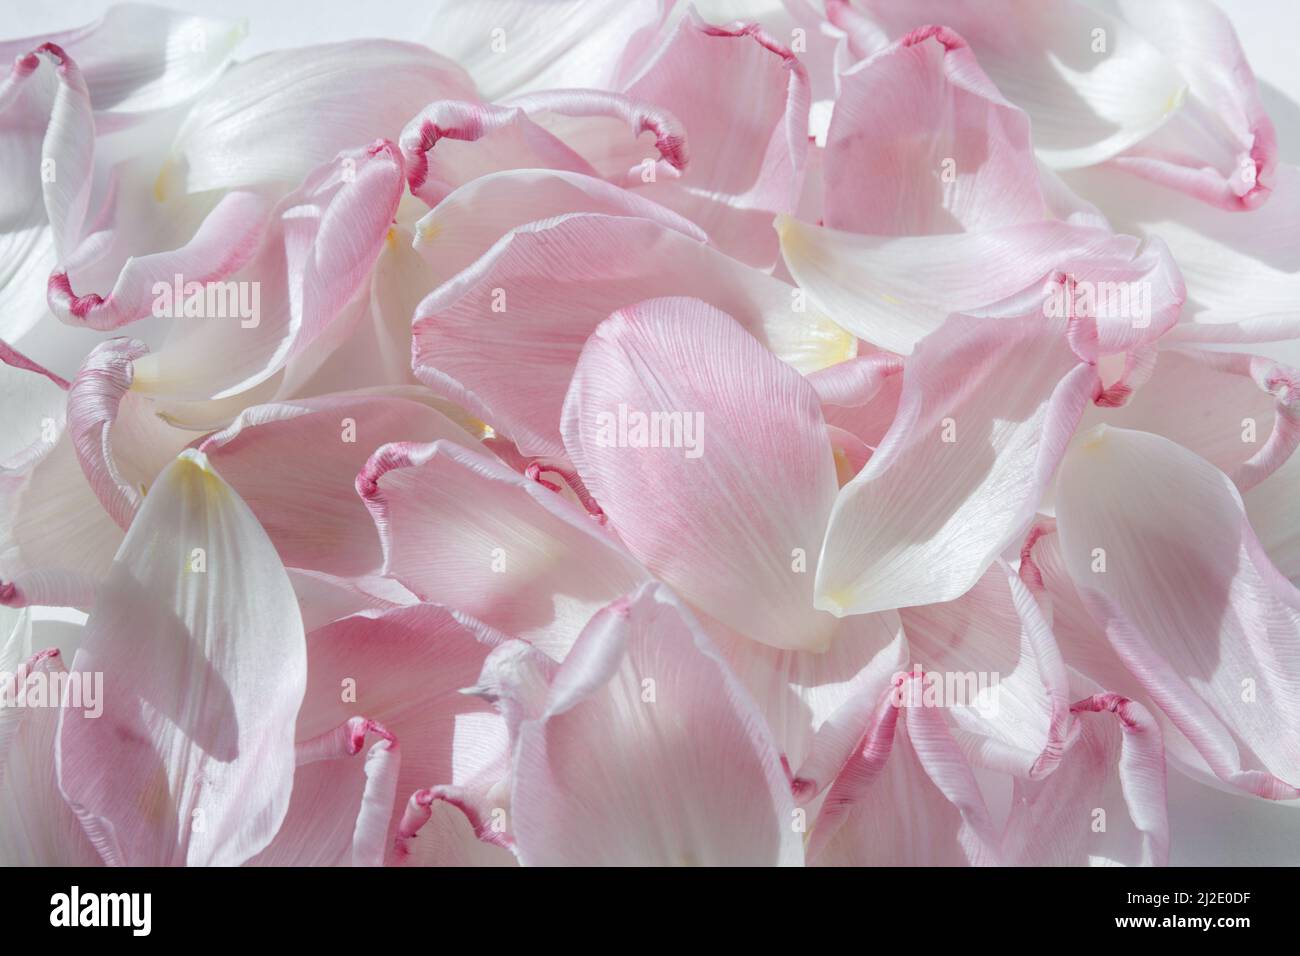 Pink fallen tulip petals. A tulip petal. A symbol of fragility and tenderness. Romantic gentle background. Stock Photo